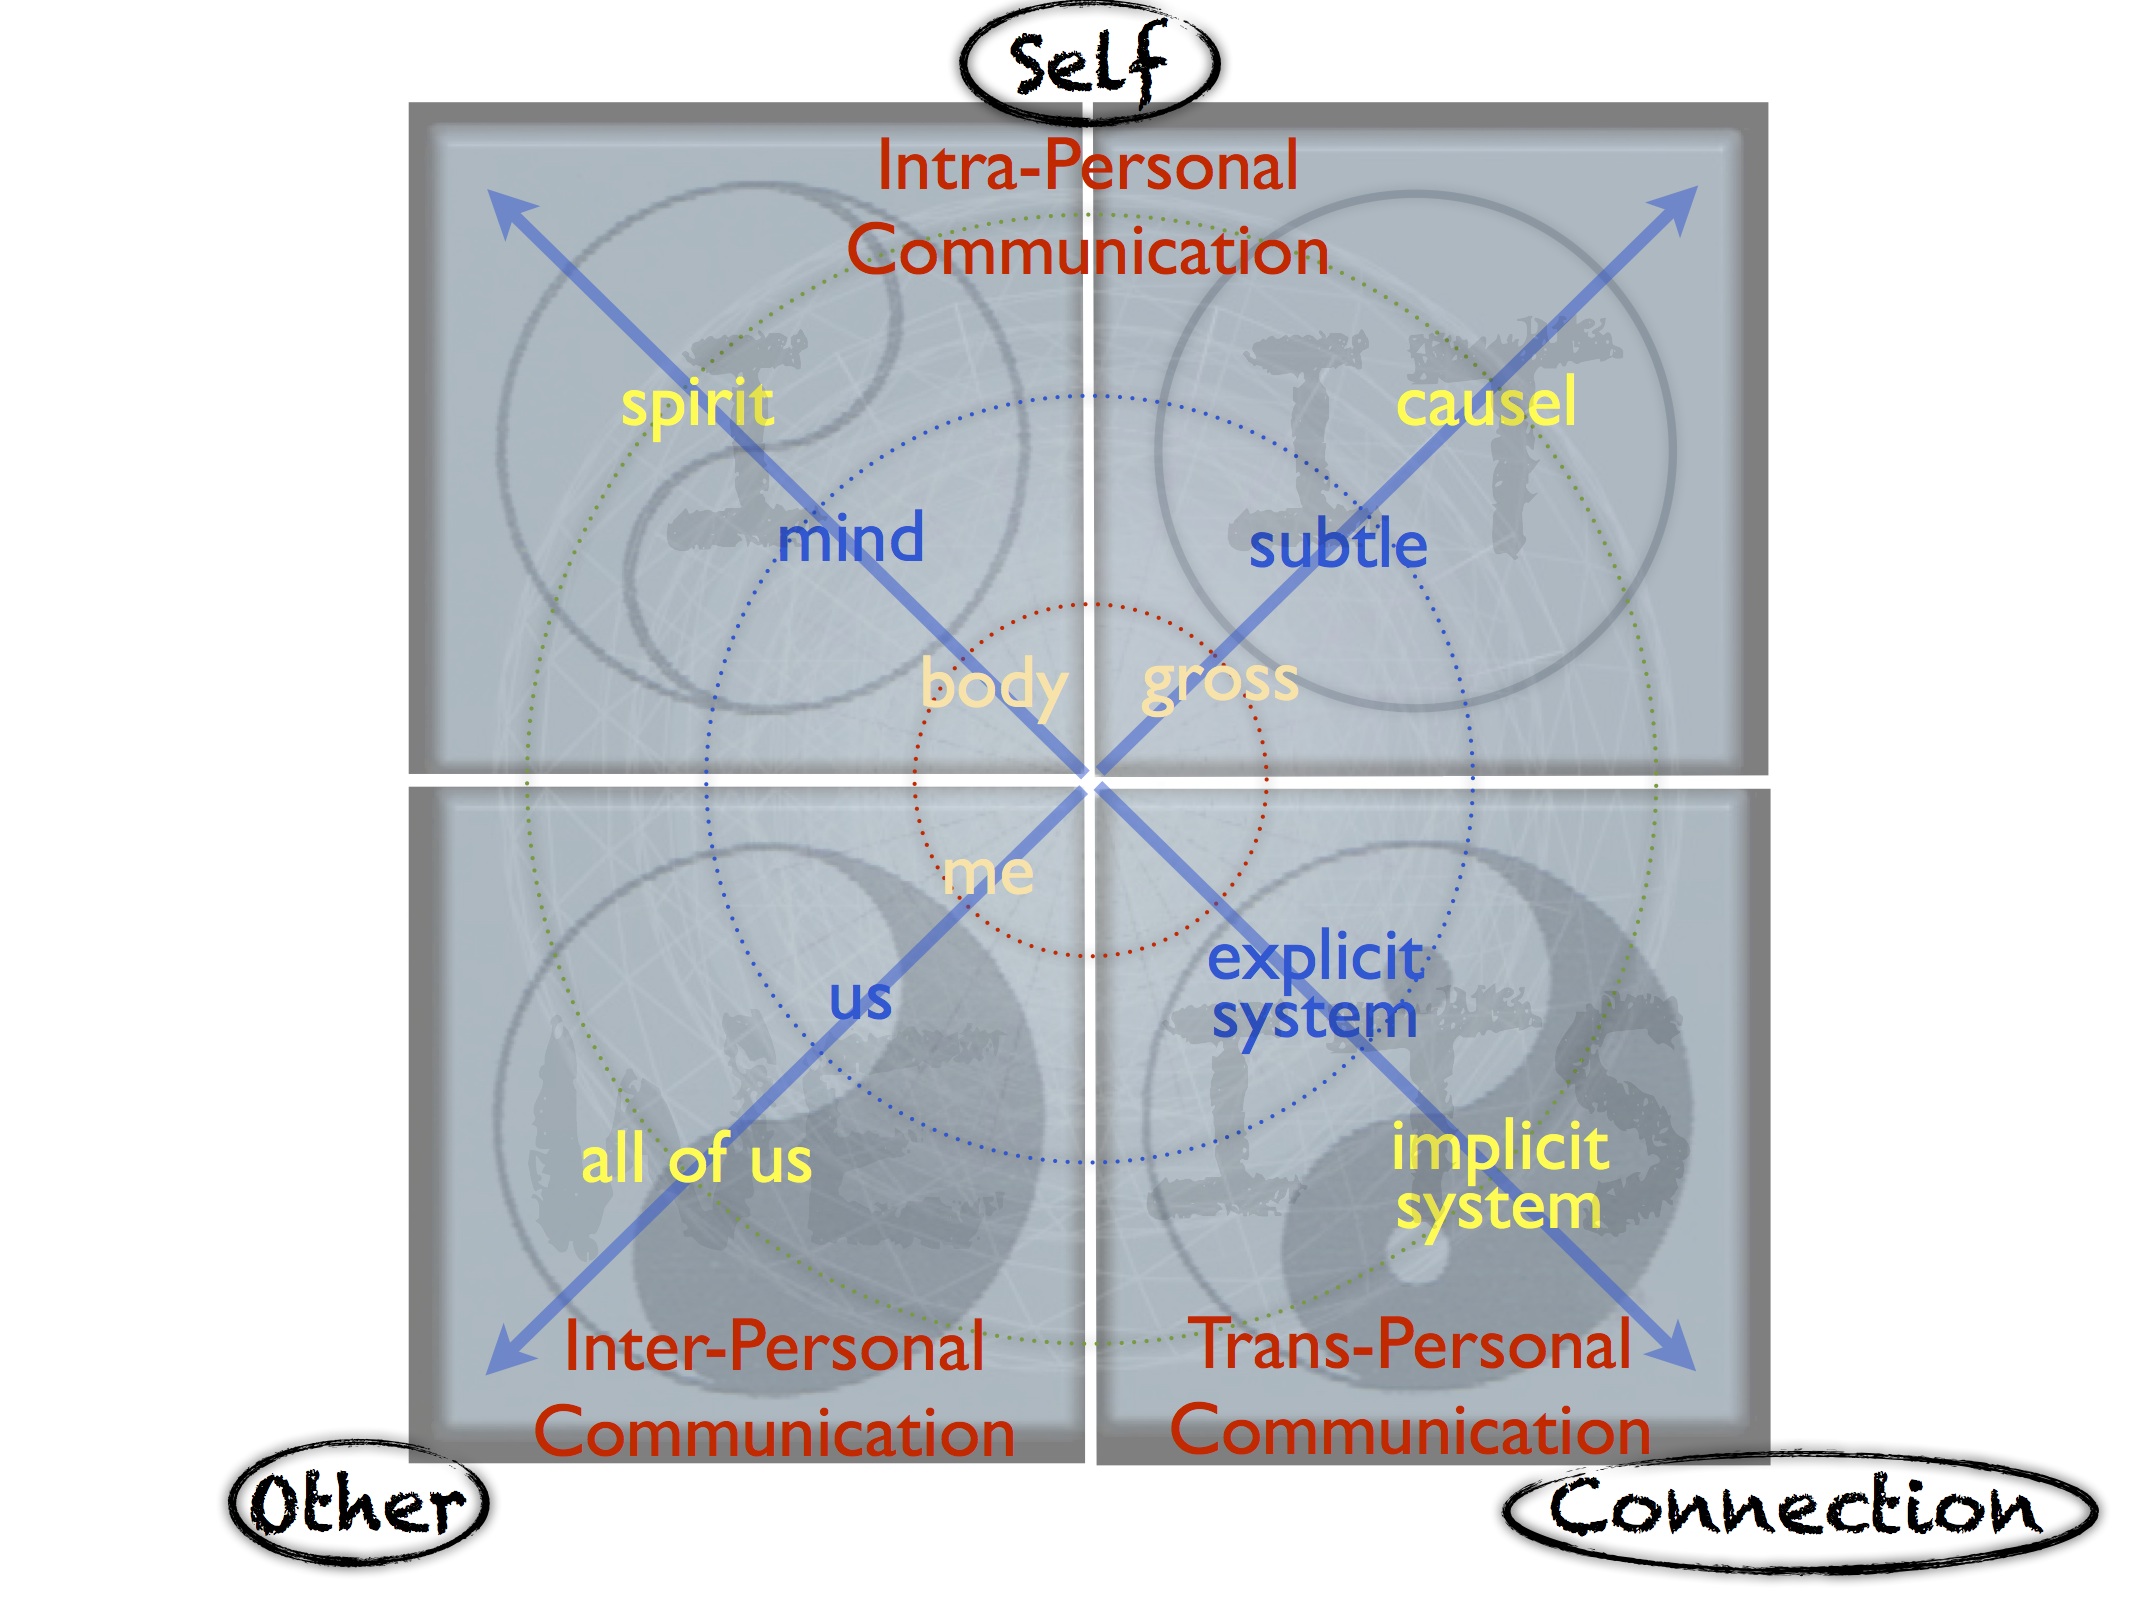 Figure 1. Intra-, inter- and trans-personal communication in AQAL map